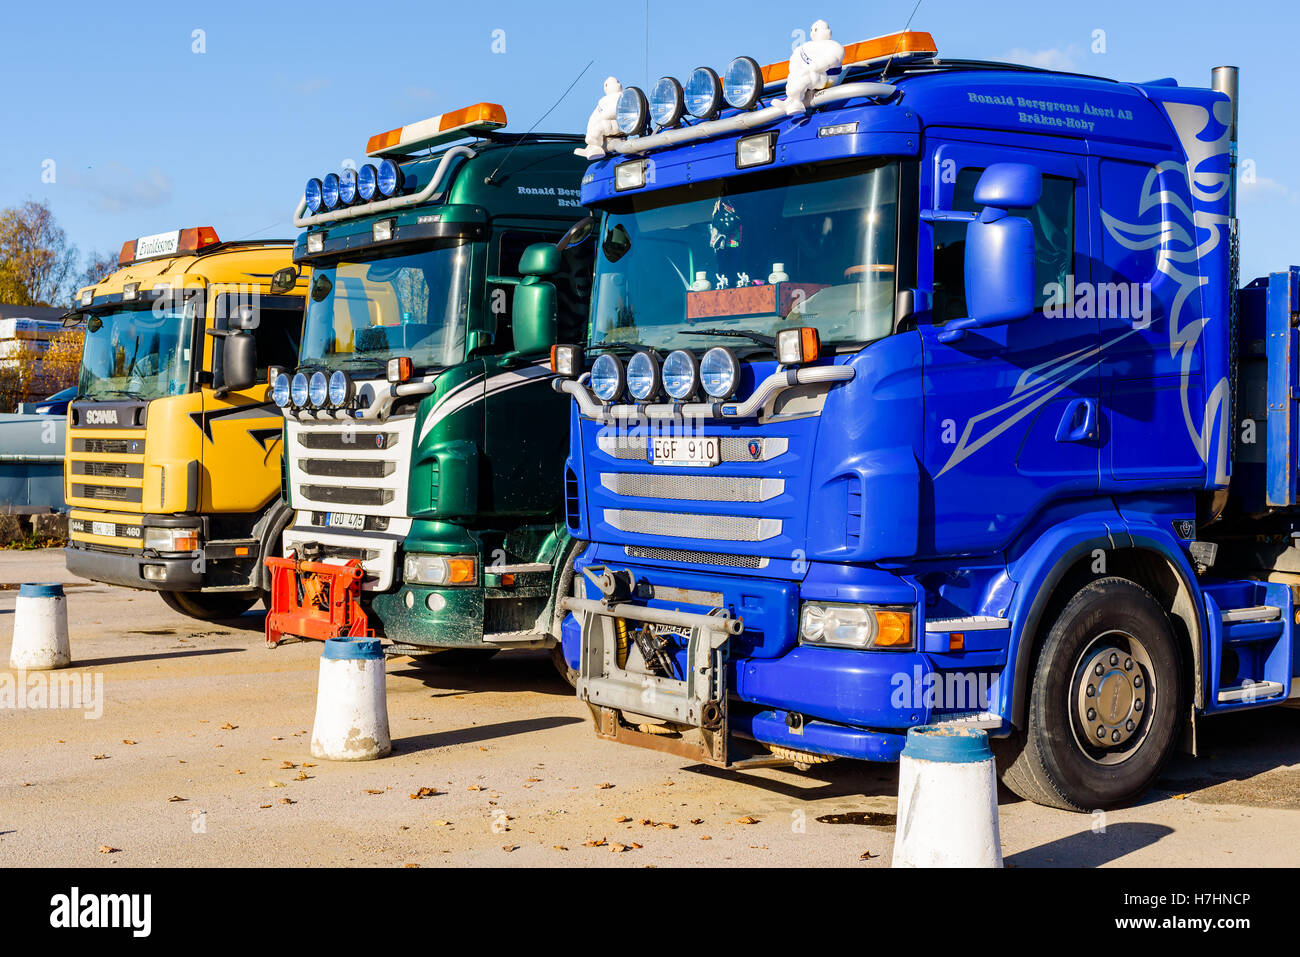 Brakne Hoby, Sweden - October 29, 2016: Documentary of industrial area. Three parked Scania trucks seen from the front. Stock Photo